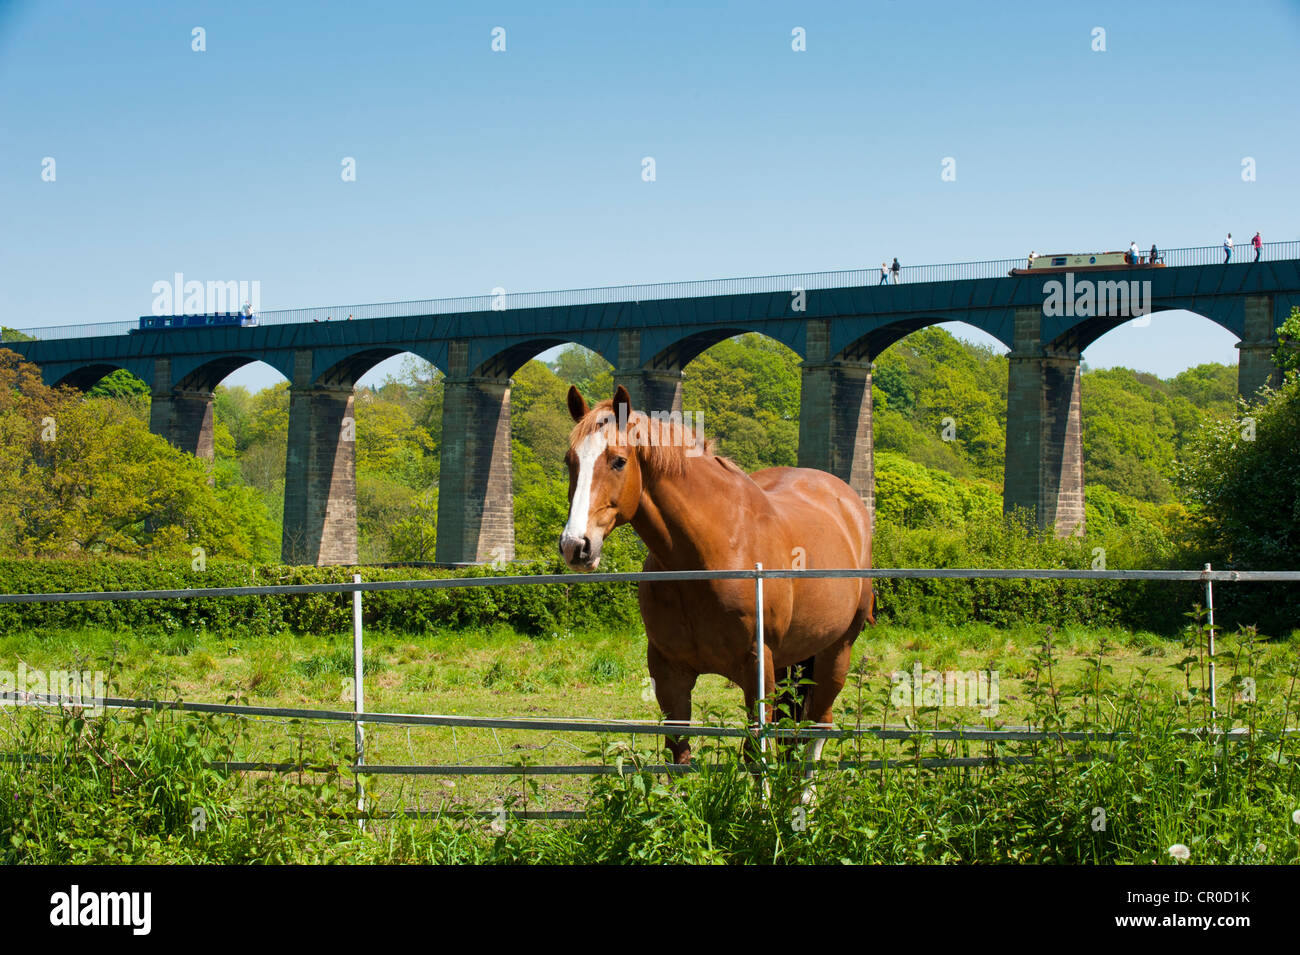 Horse in field beside Pontcysyllte Aqueduct carrying the Llangollen Canal, Wrexham, Wales Stock Photo